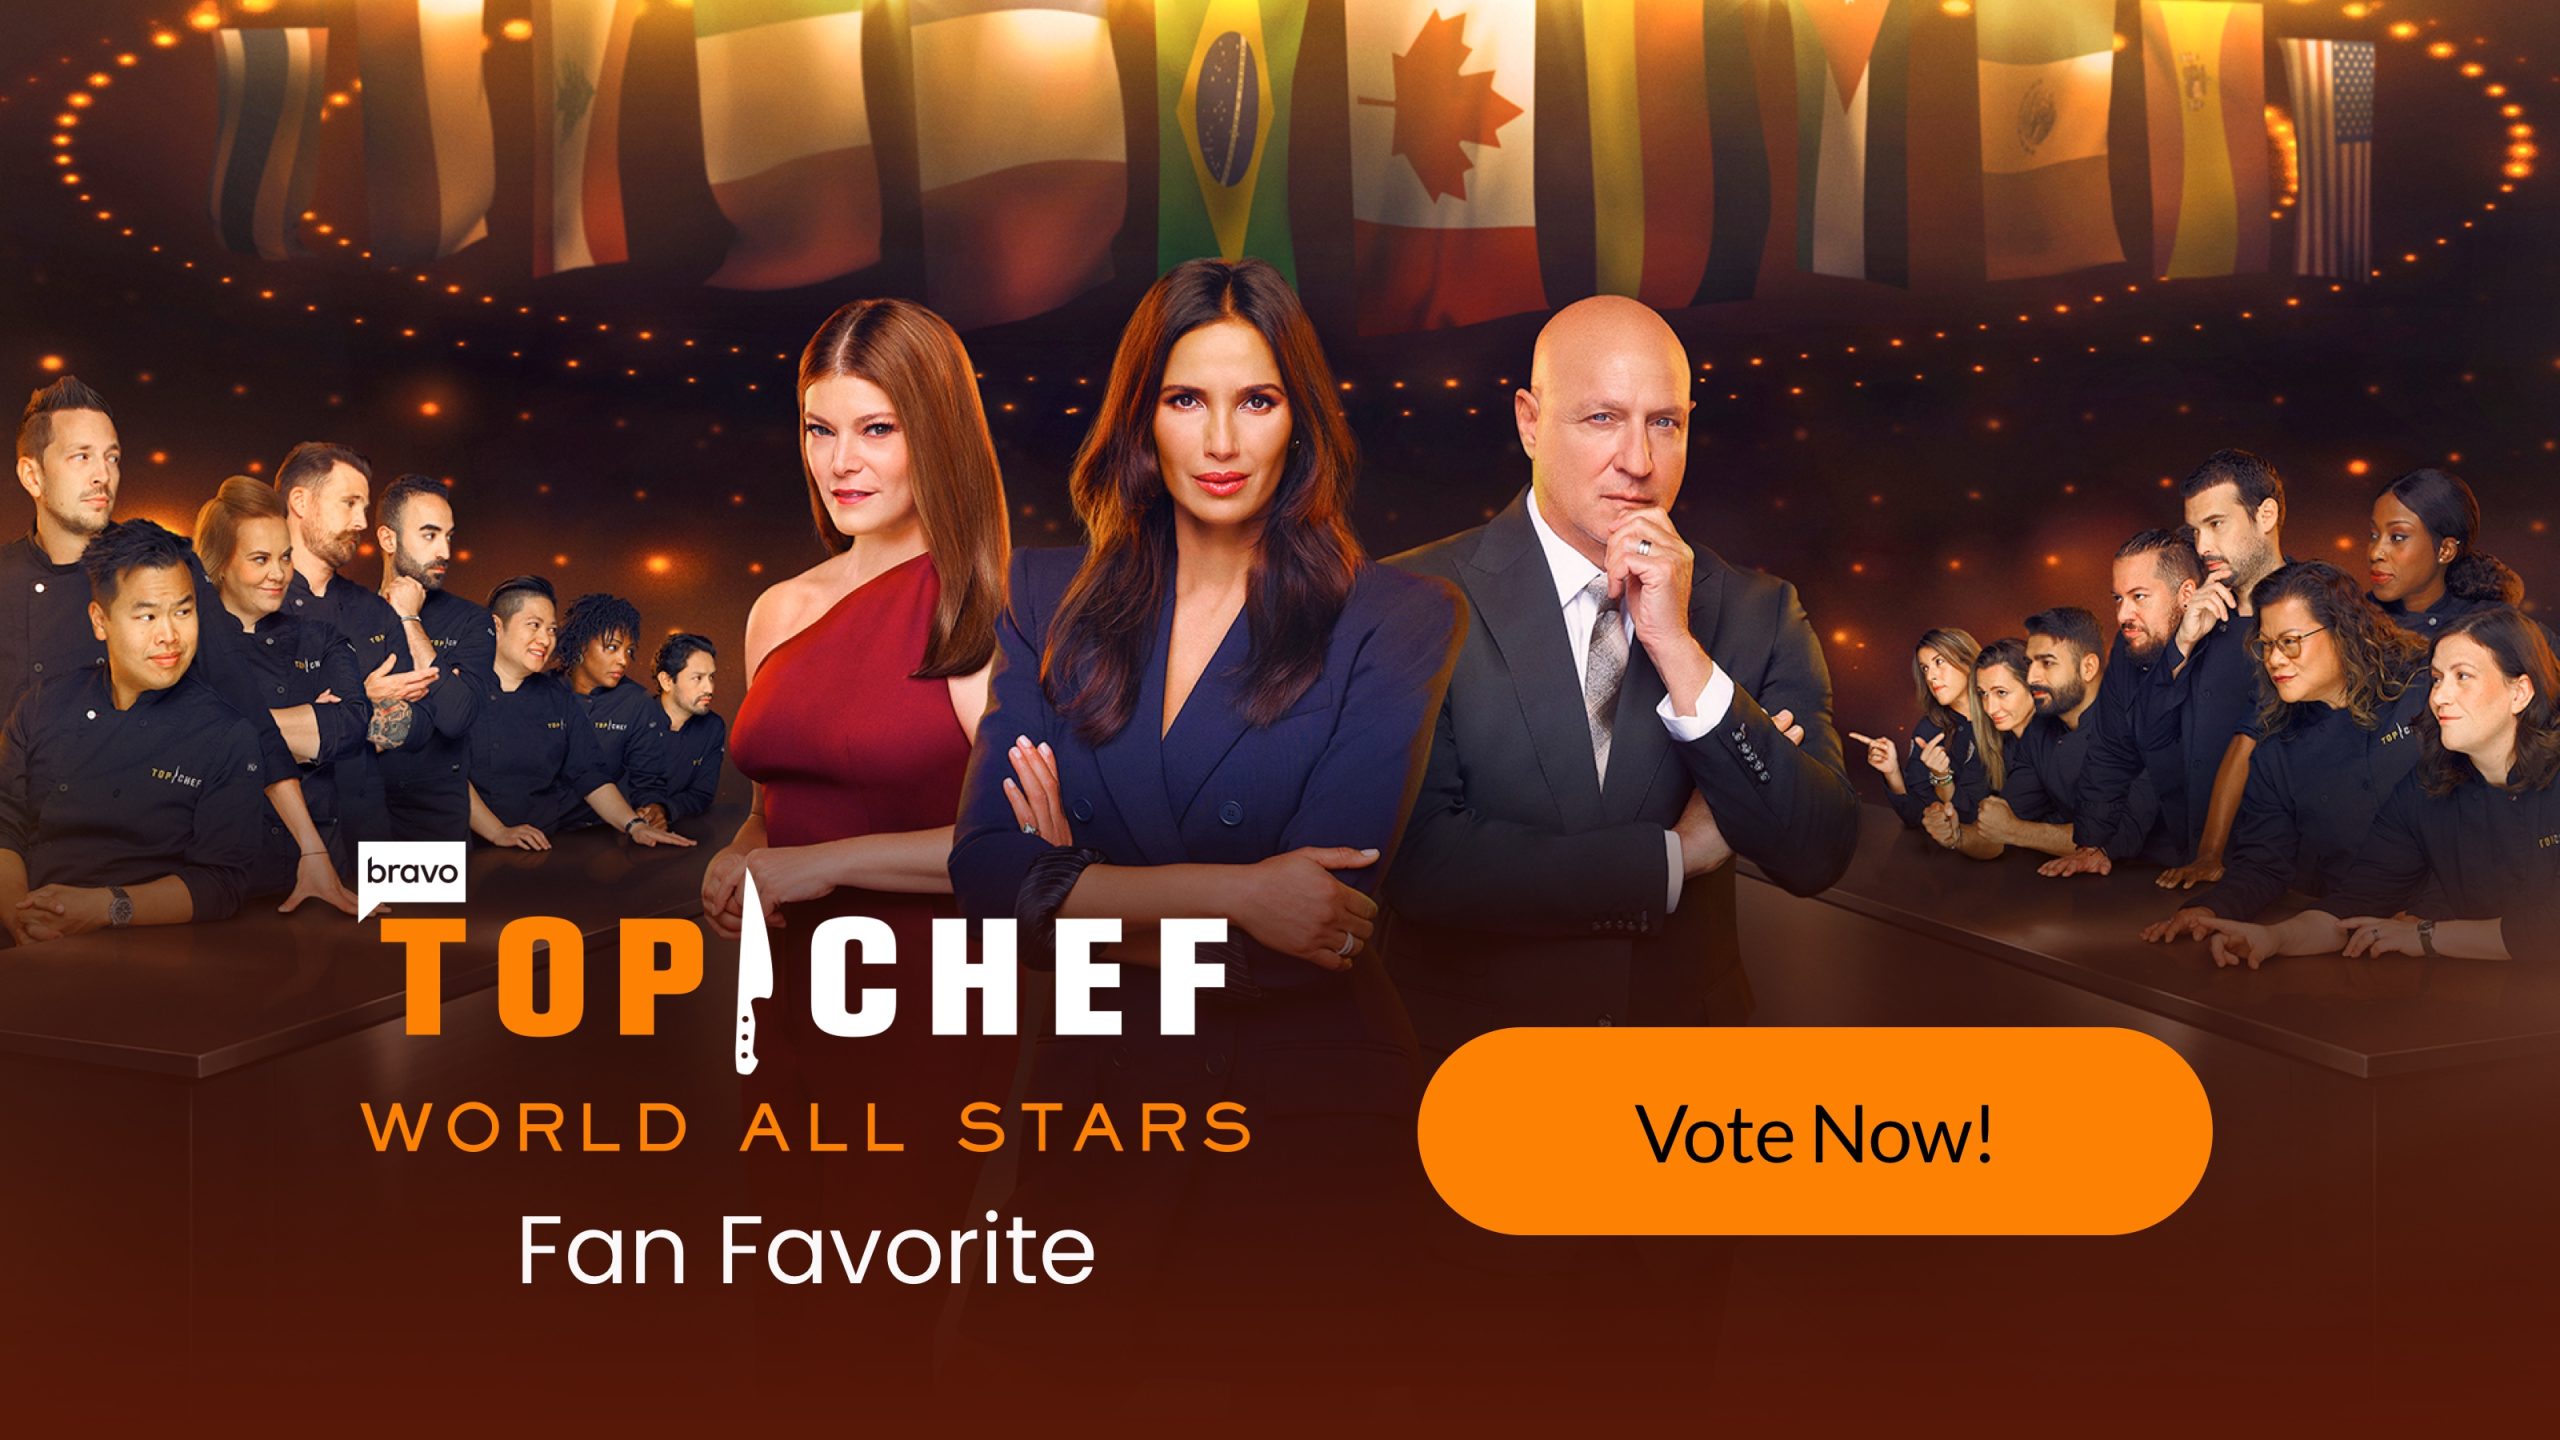 Vote Now for Your Top Chef Fan Favorite in Season 20 and Decide the Winner! 11